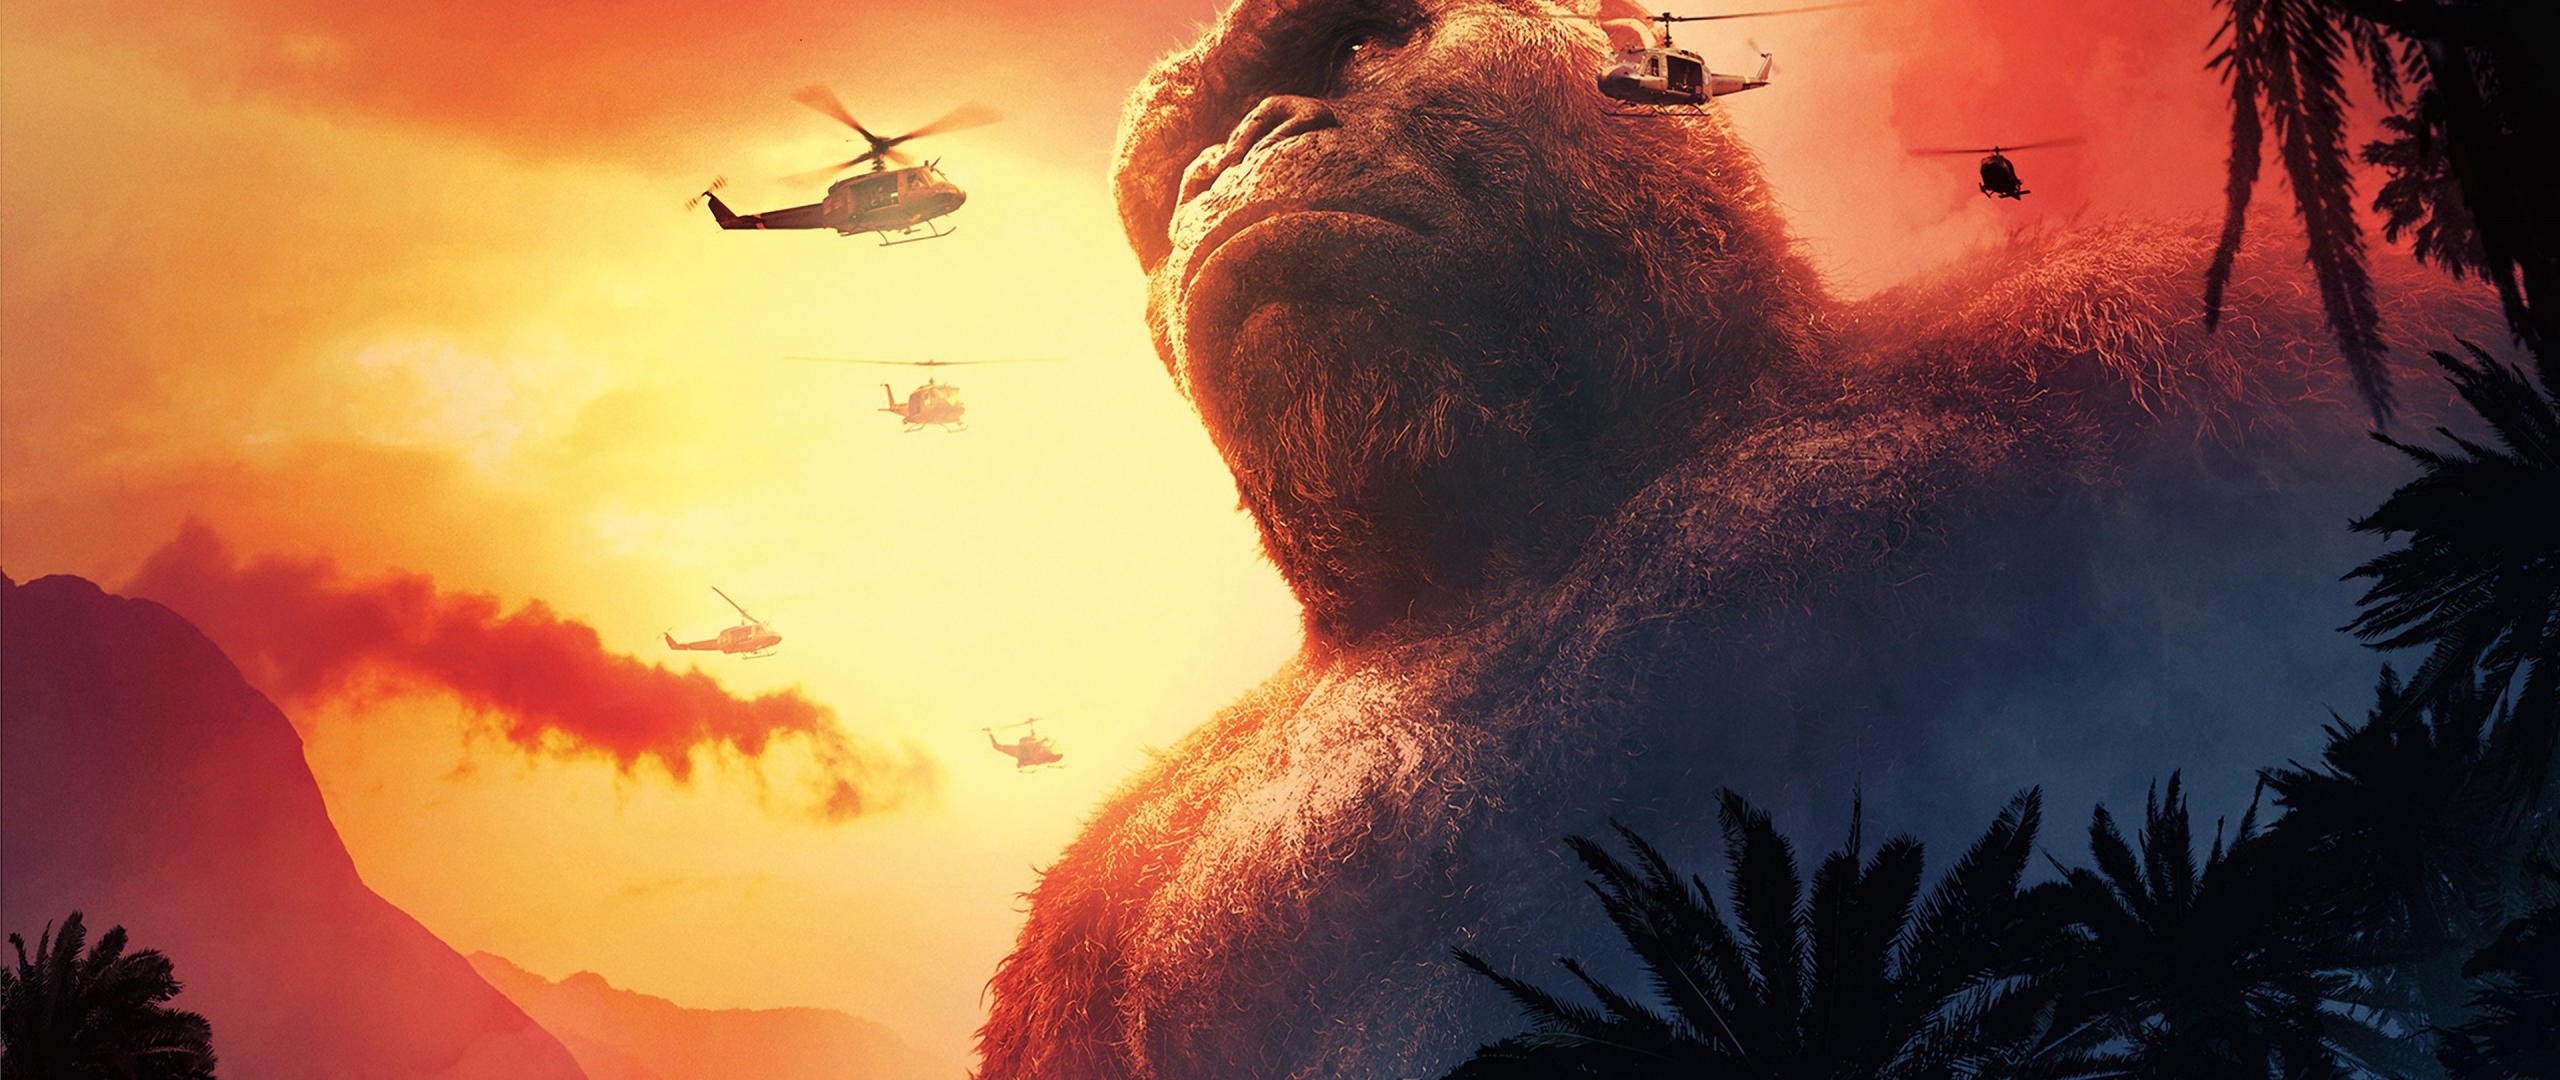 2560x1080 Resolution Kong Skull Island 4k Helicopter 2560x1080 ...